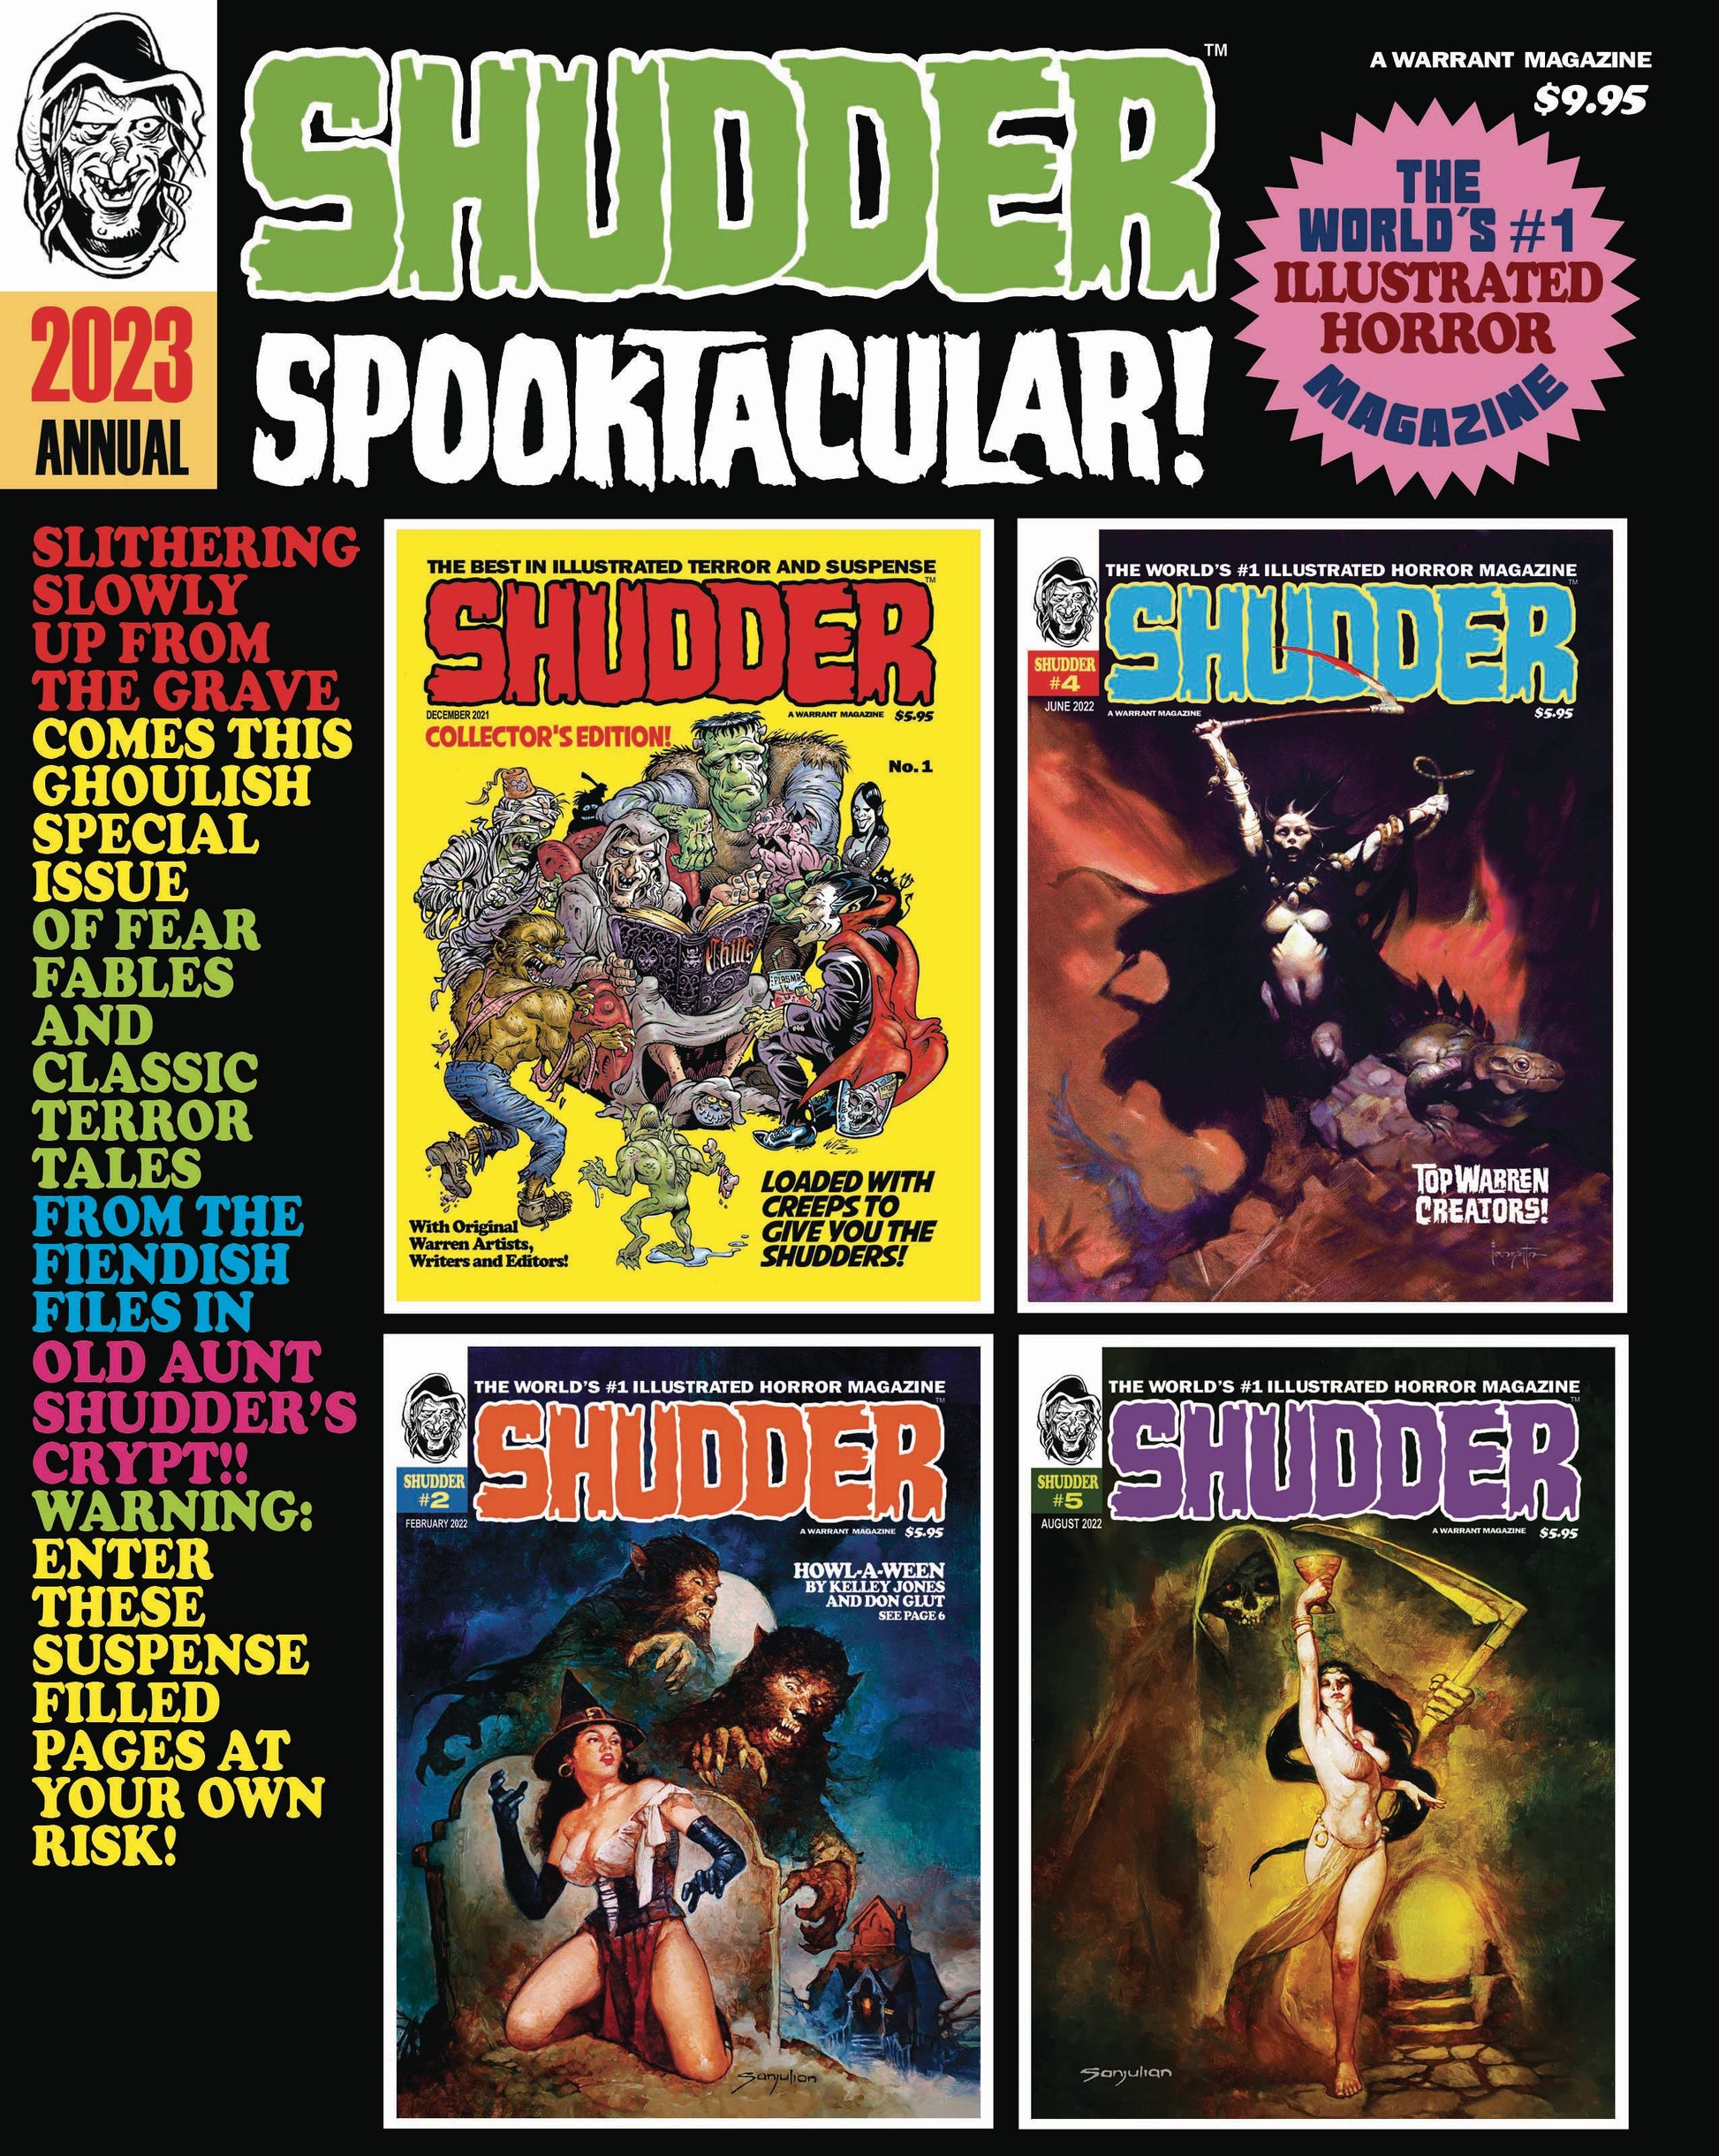 The One Stop Shop Comics & Games Shudder 2023 Spooktacular Annual (Mr) (09/07/2022) WARRANT PUBLISHING COMPANY